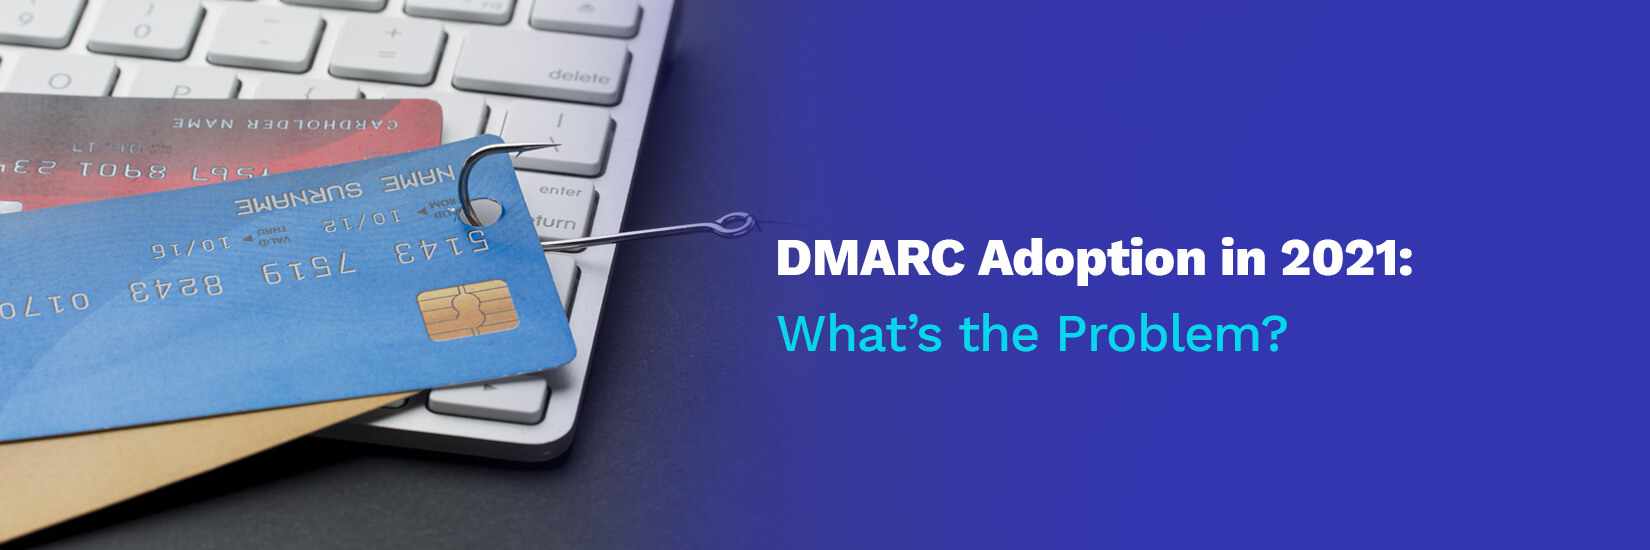 DMARC Adoption in 2021: What’s the Problem?